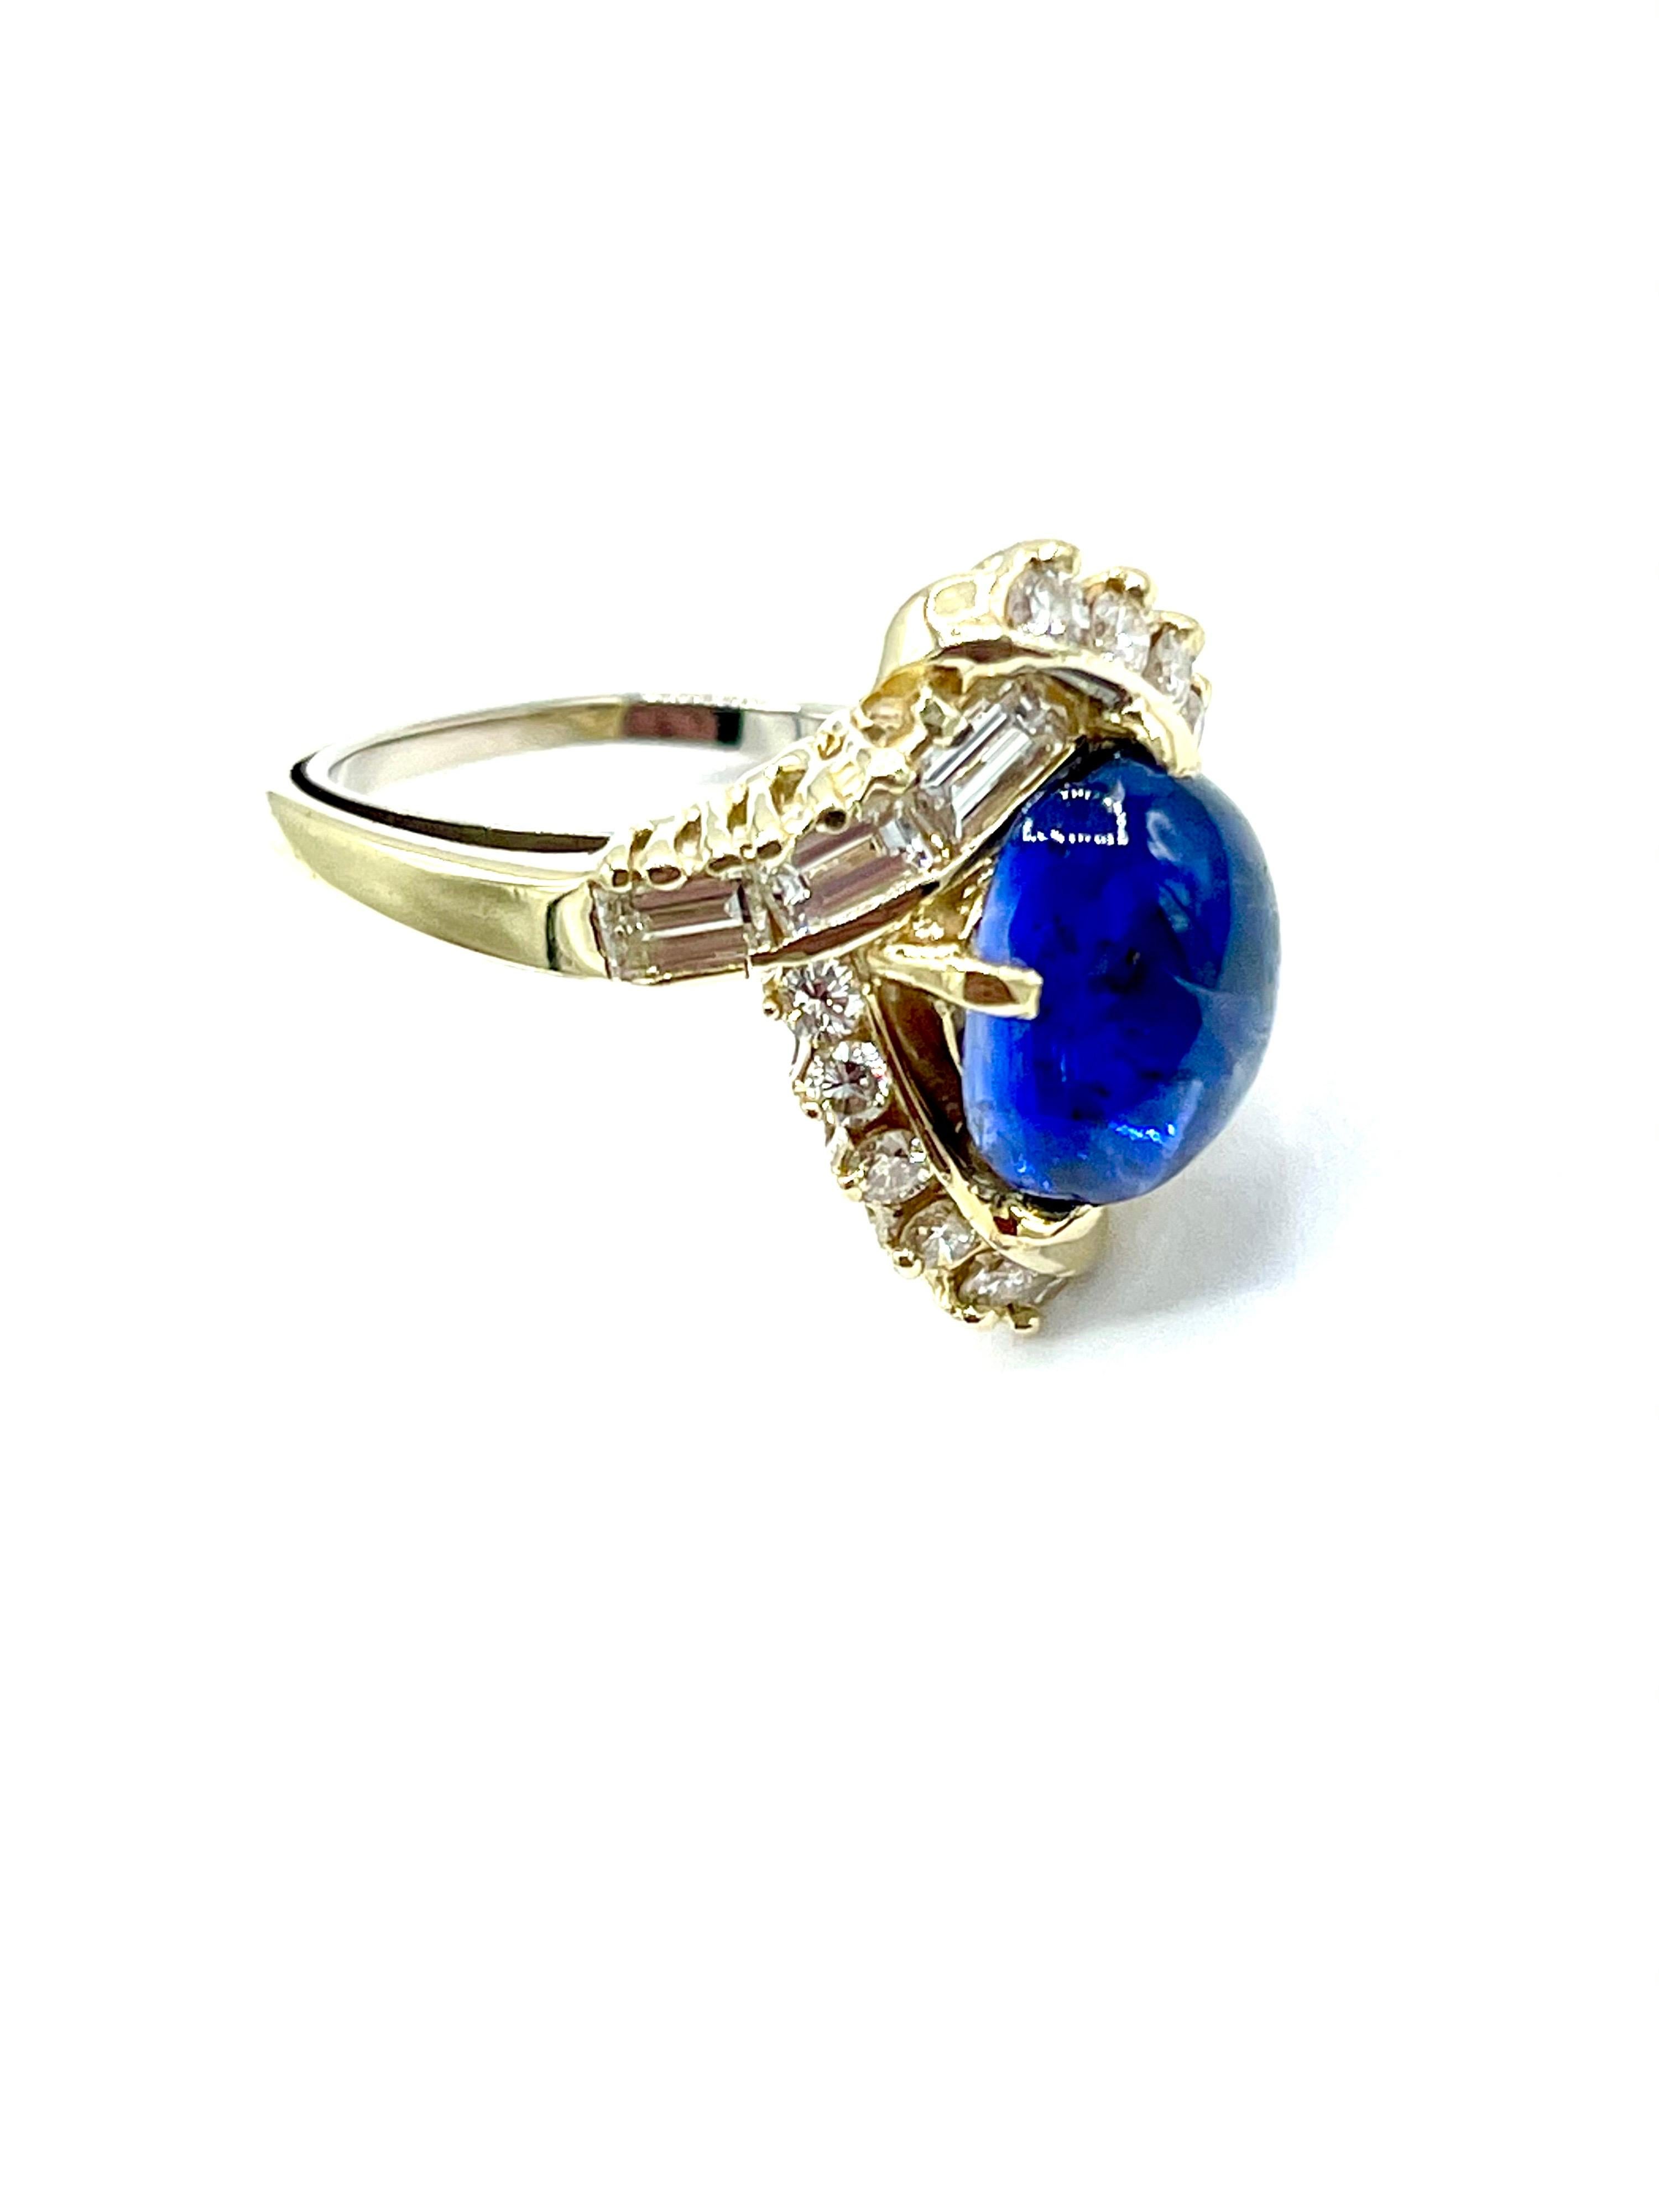 Women's or Men's 3.78 Carat Cabochon Sapphire and Diamond Yellow Gold Ring For Sale